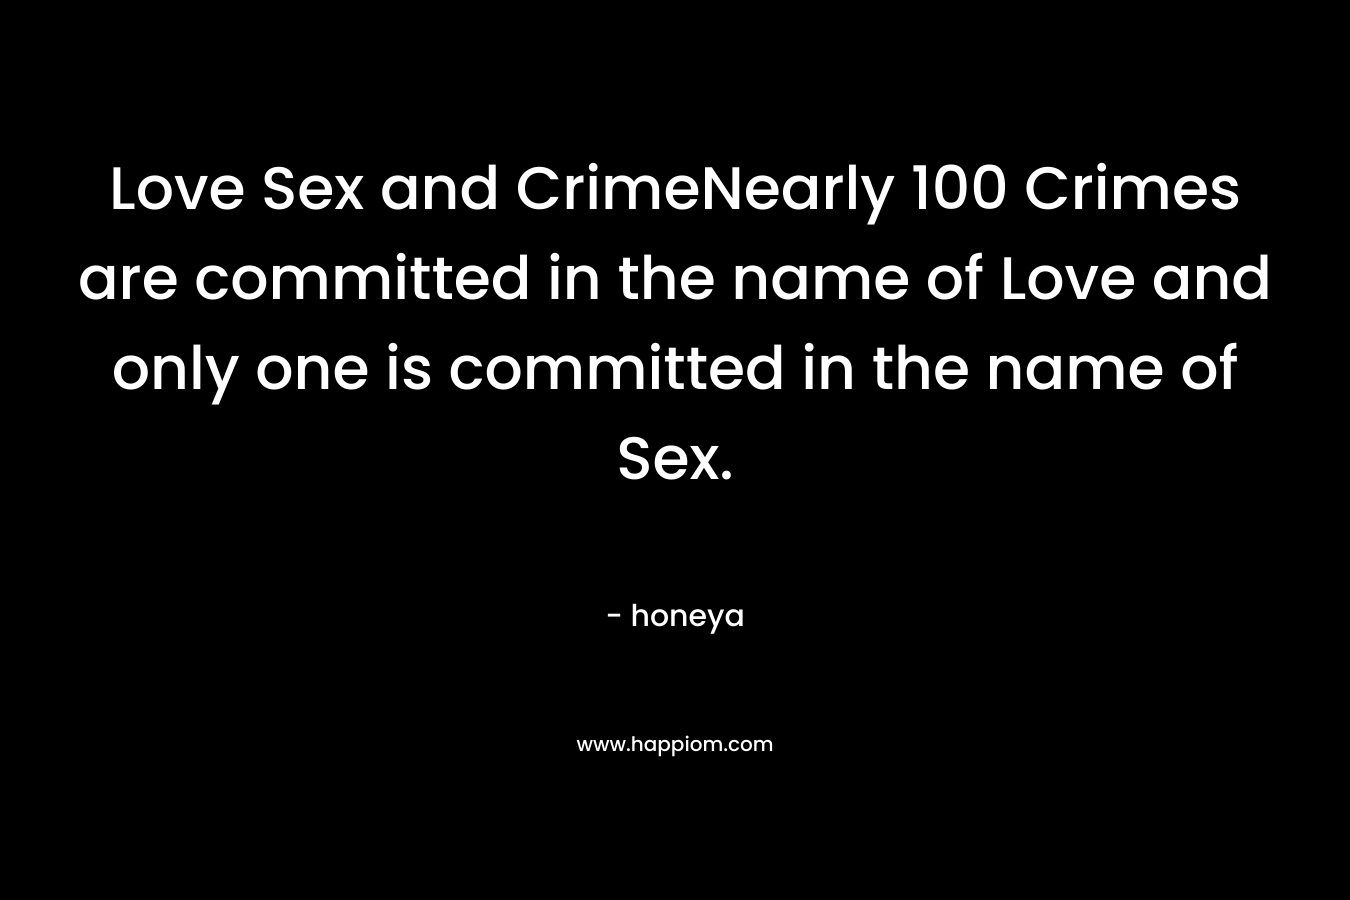 Love Sex and CrimeNearly 100 Crimes are committed in the name of Love and only one is committed in the name of Sex.